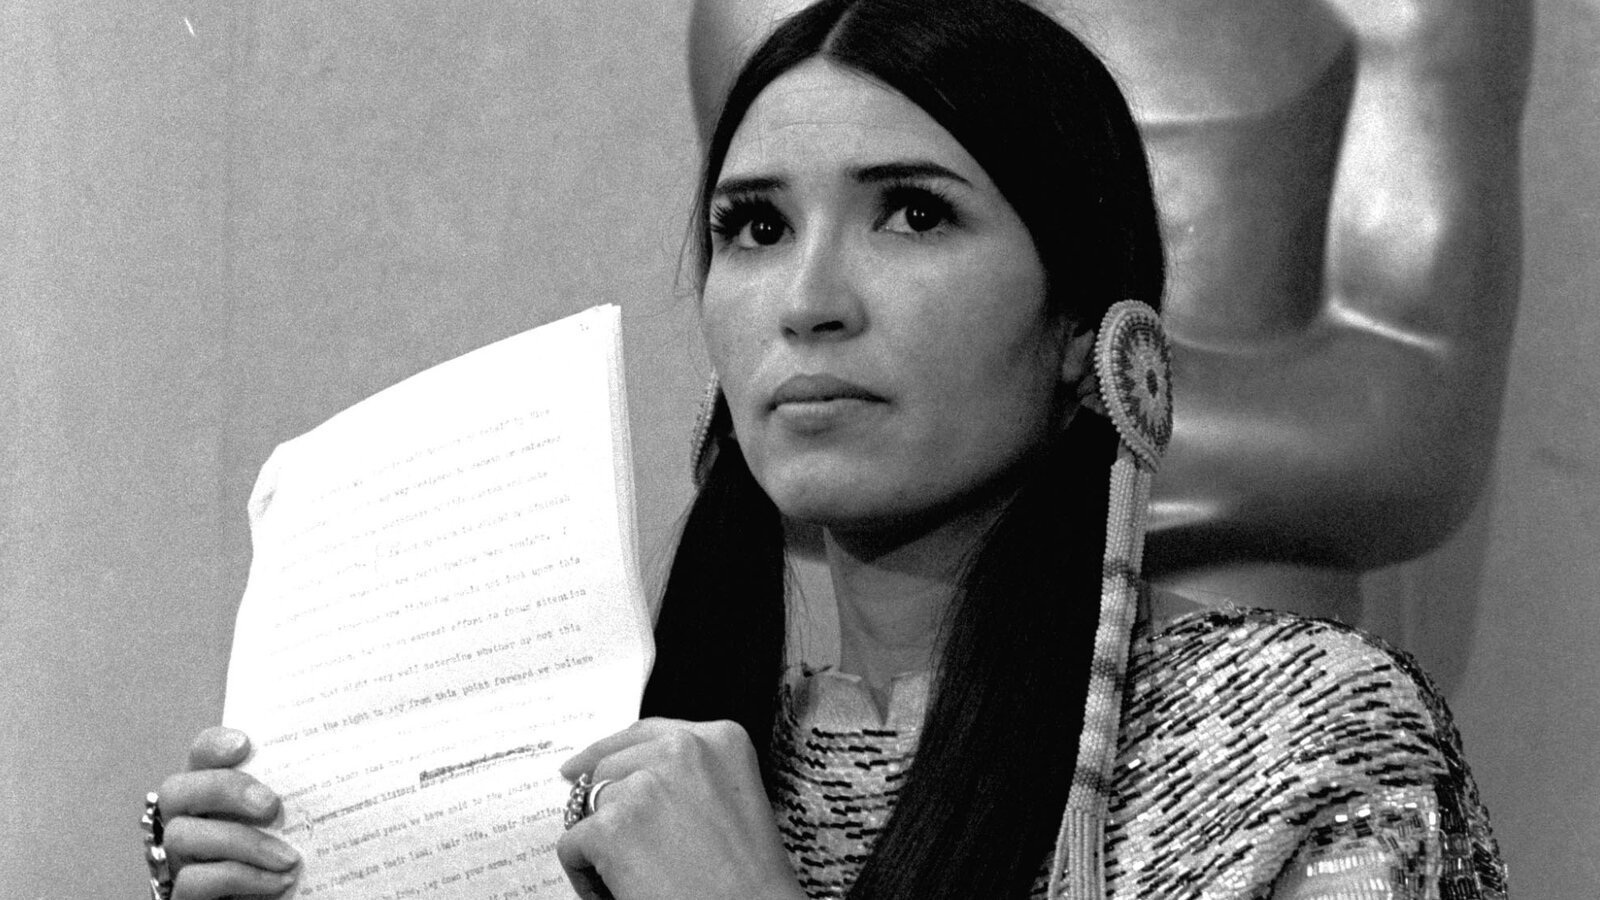 celebrity deaths in 2022 - sacheen littlefeather - erat effort to tour sitent fra try as the right to from the potas foreve bolase wait to the nee father fe, their ratlles Dres te v landed ye ang up the 20 frey ng down your arms, my belan Ju Tay Aown